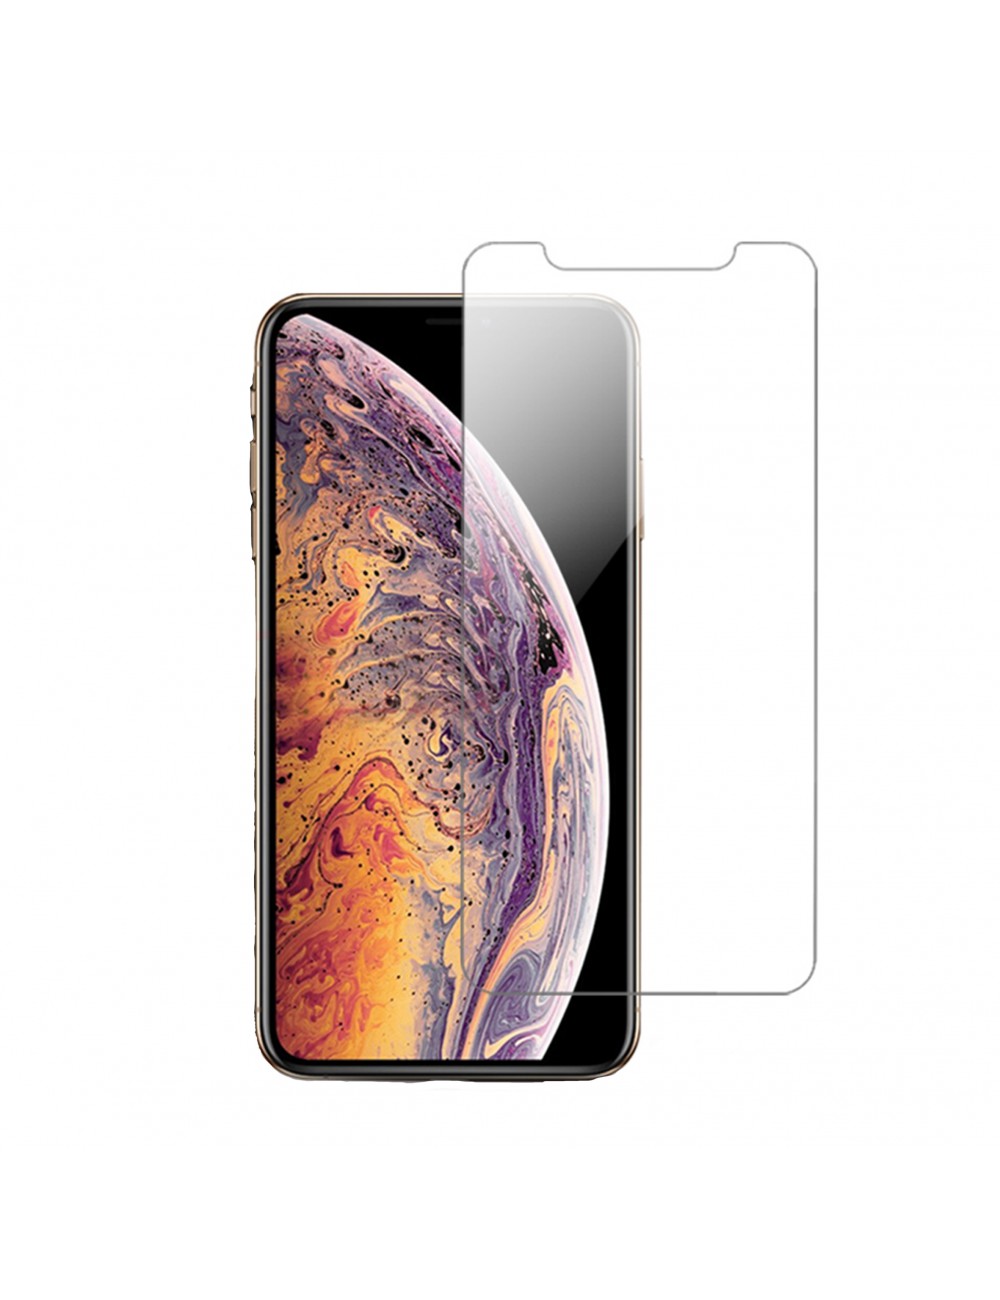 iPhone Xs Max glass screen protector